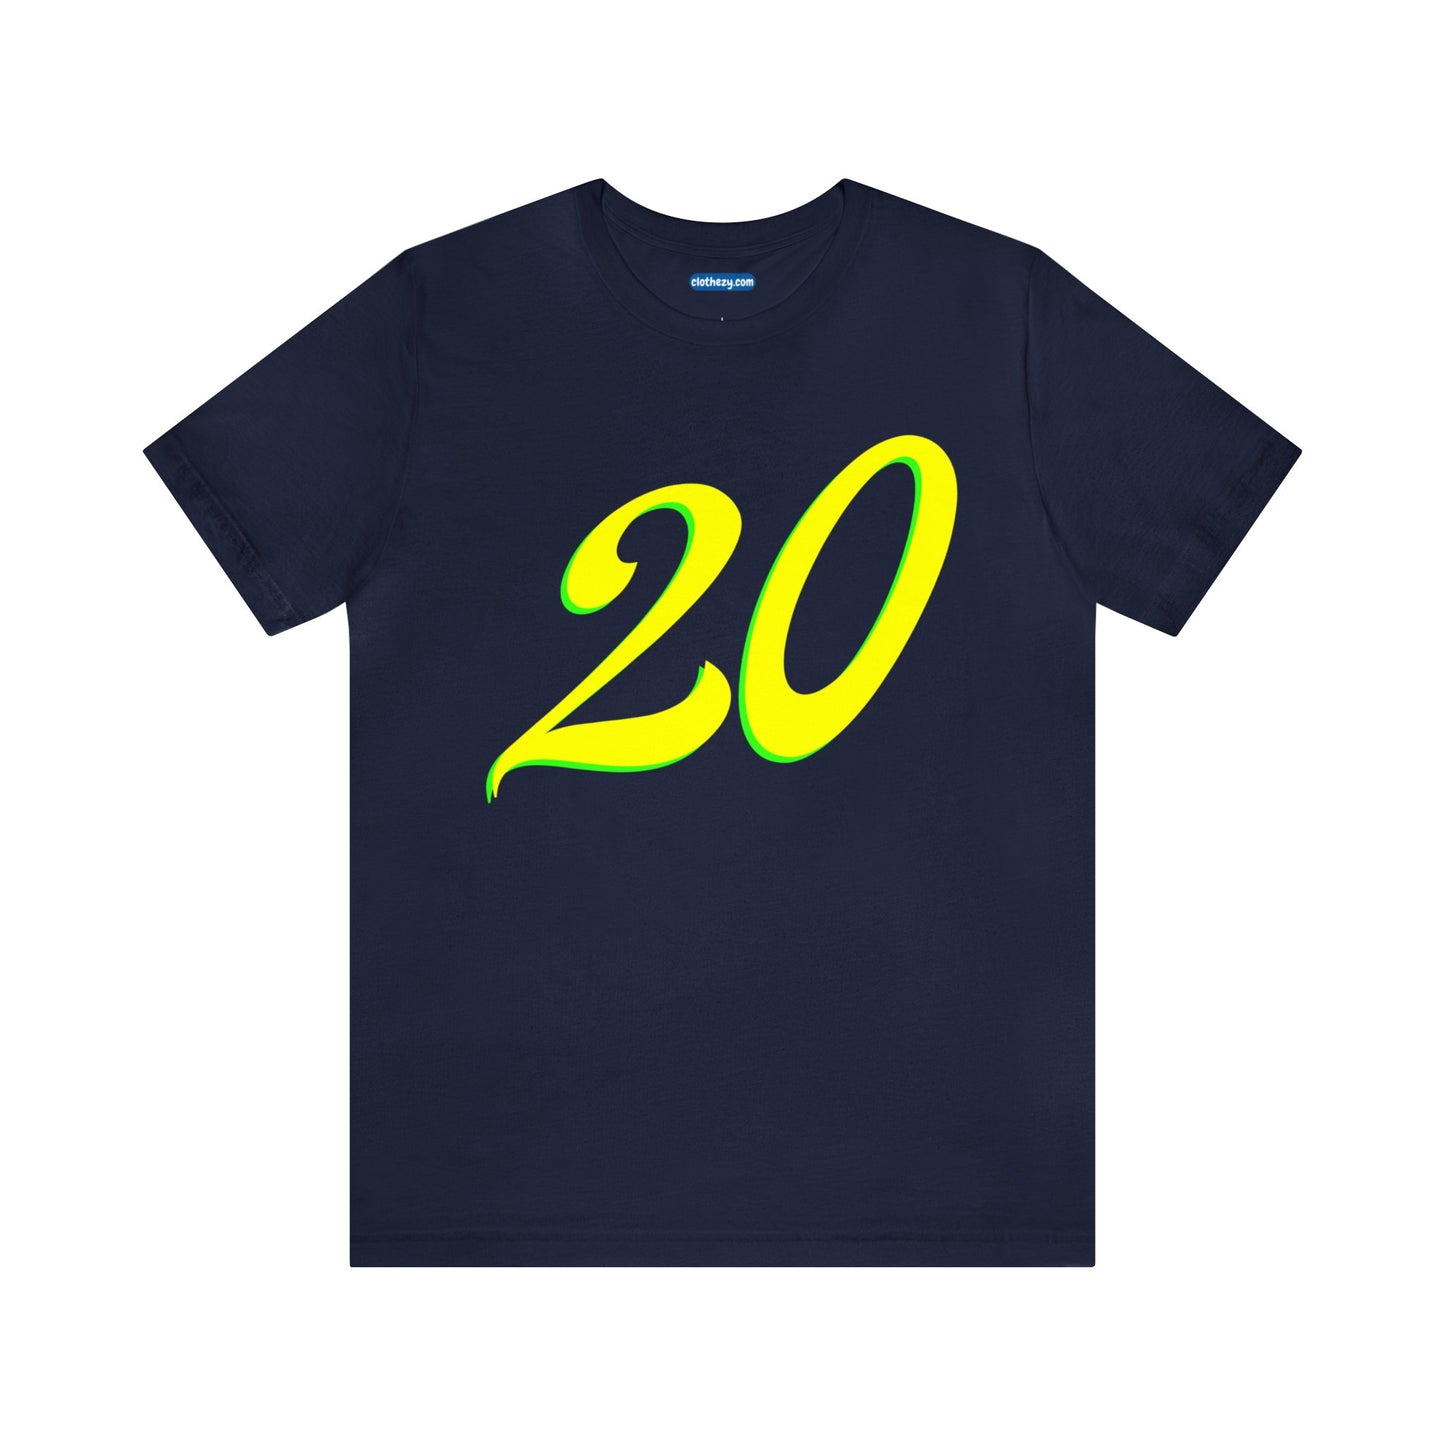 Number 20 Design - Soft Cotton Tee for birthdays and celebrations, Gift for friends and family, Multiple Options by clothezy.com in Orange Size Small - Buy Now